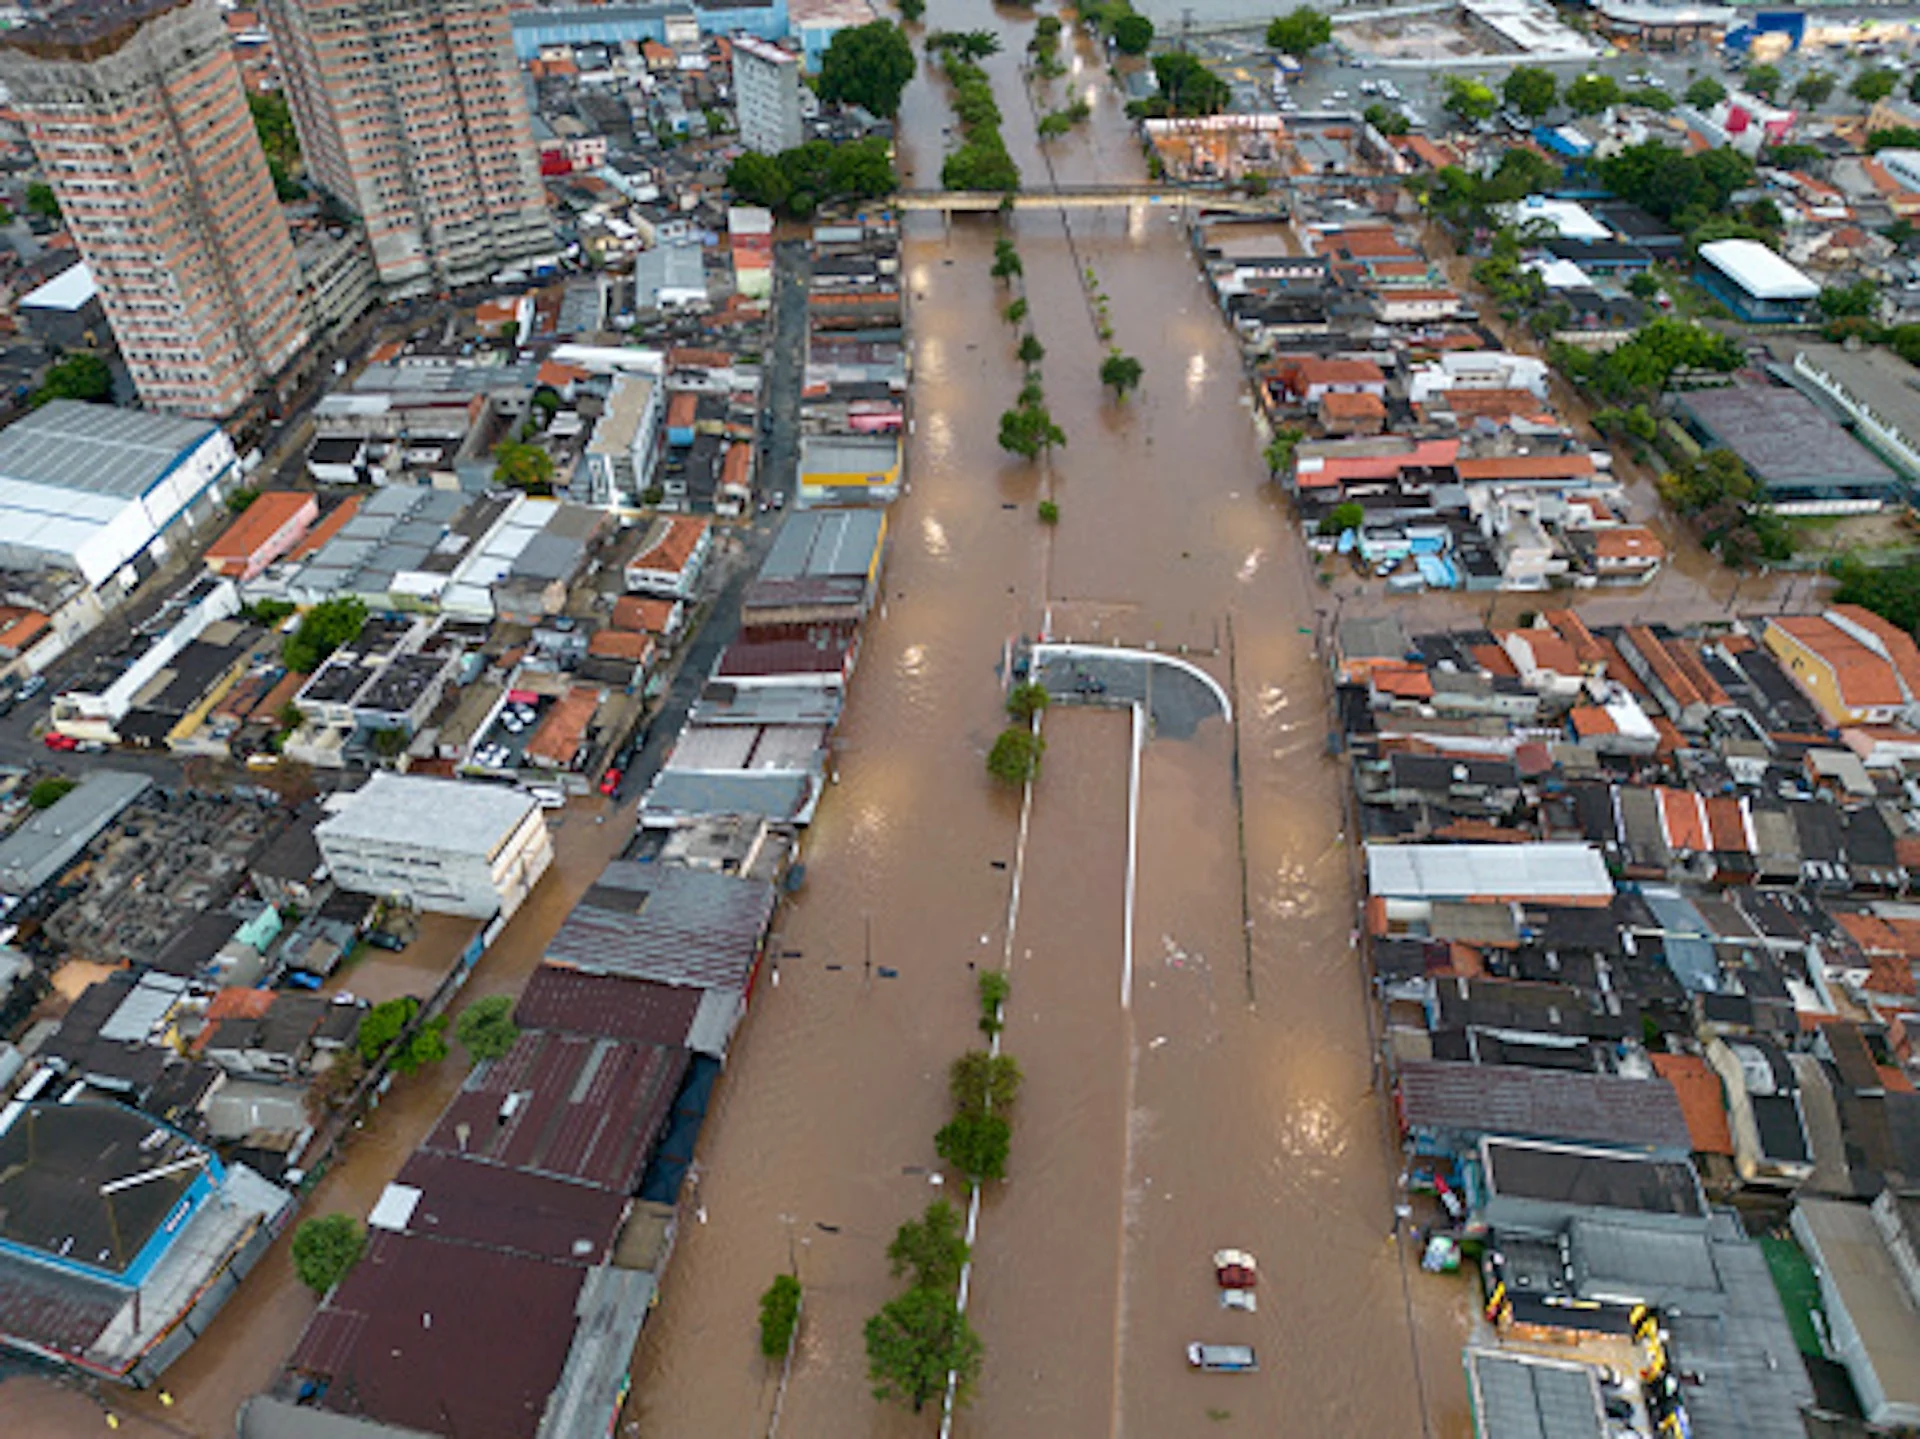 Floods battering Brazil, Afghanistan are extreme events scientists not ready for